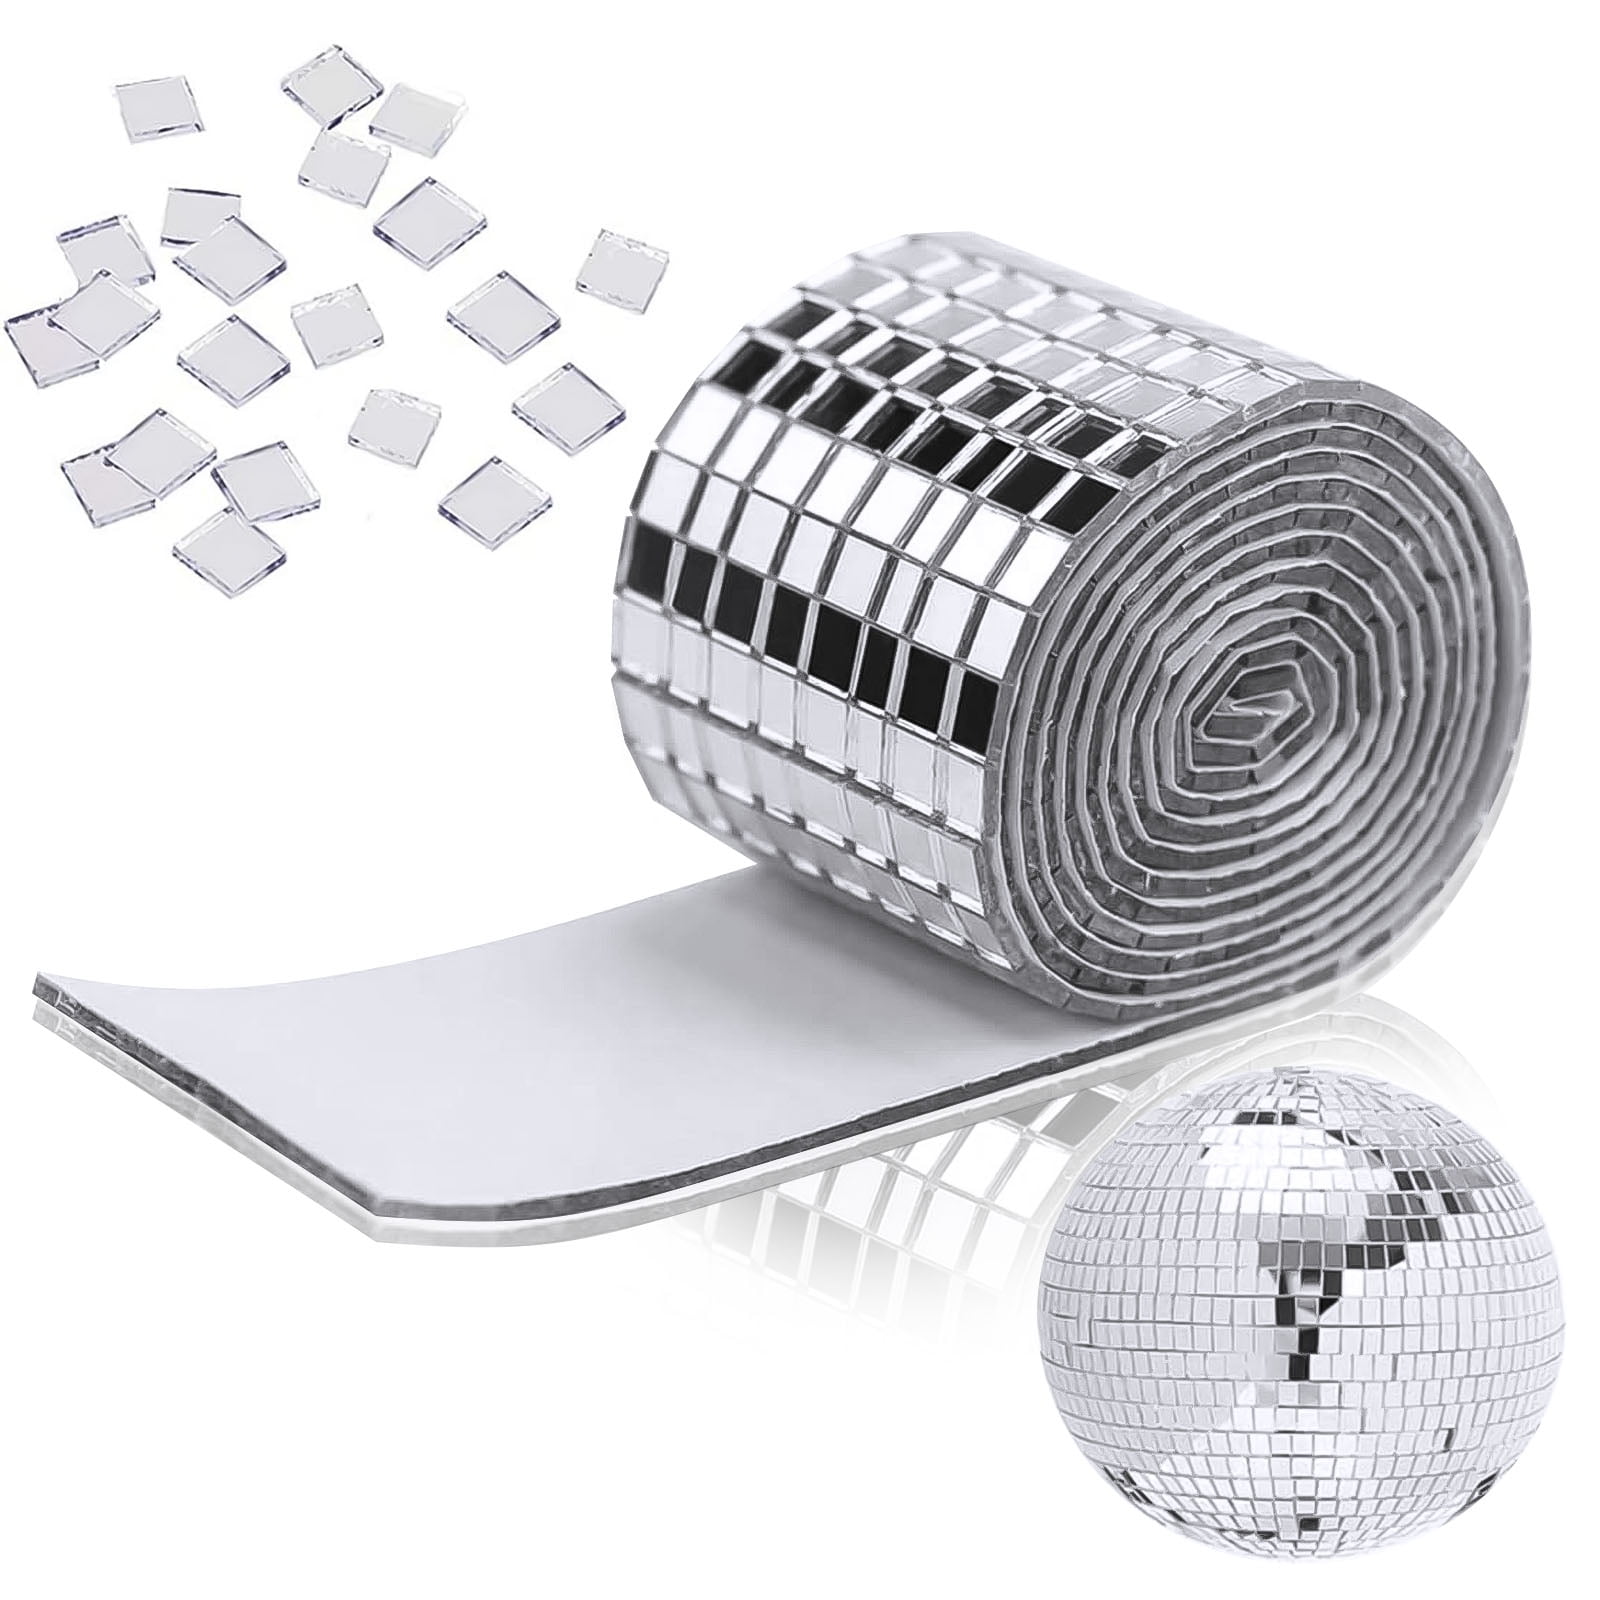 18000 PCS Silver Mini Square Disco Tiles, Self-Adhesive Mirror Mosaic  Tiles，Glass Mosaic Stickers for Vases, Cups, Home Decoration